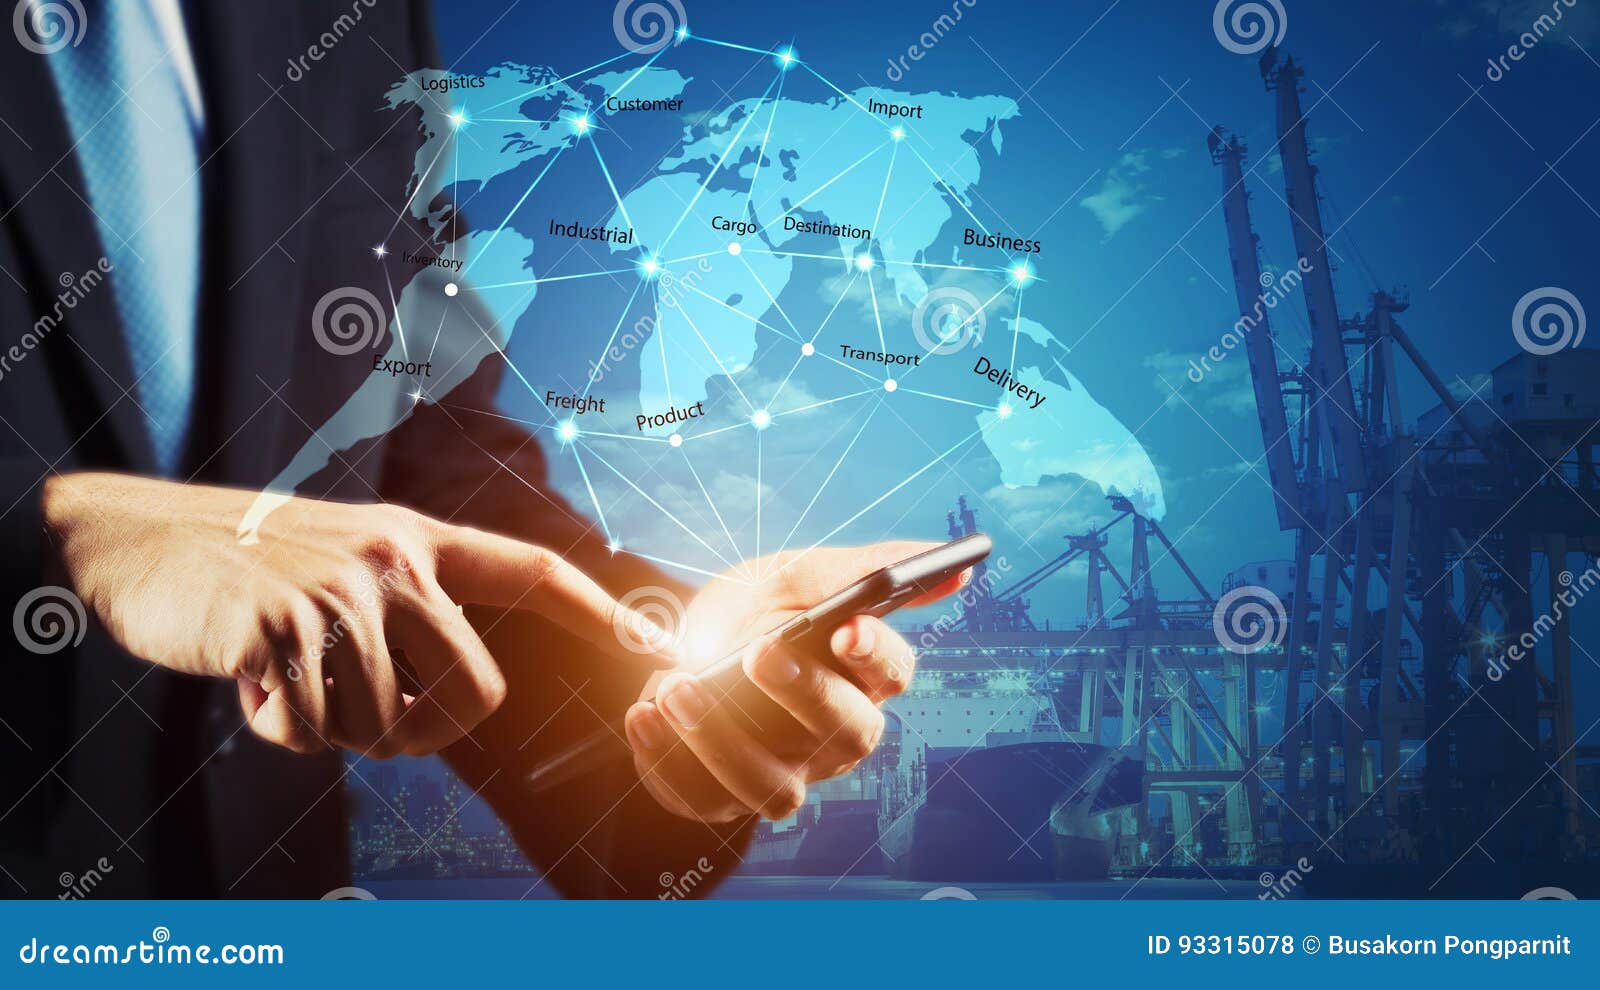 business logistics concept, global business connection technology interface gobal